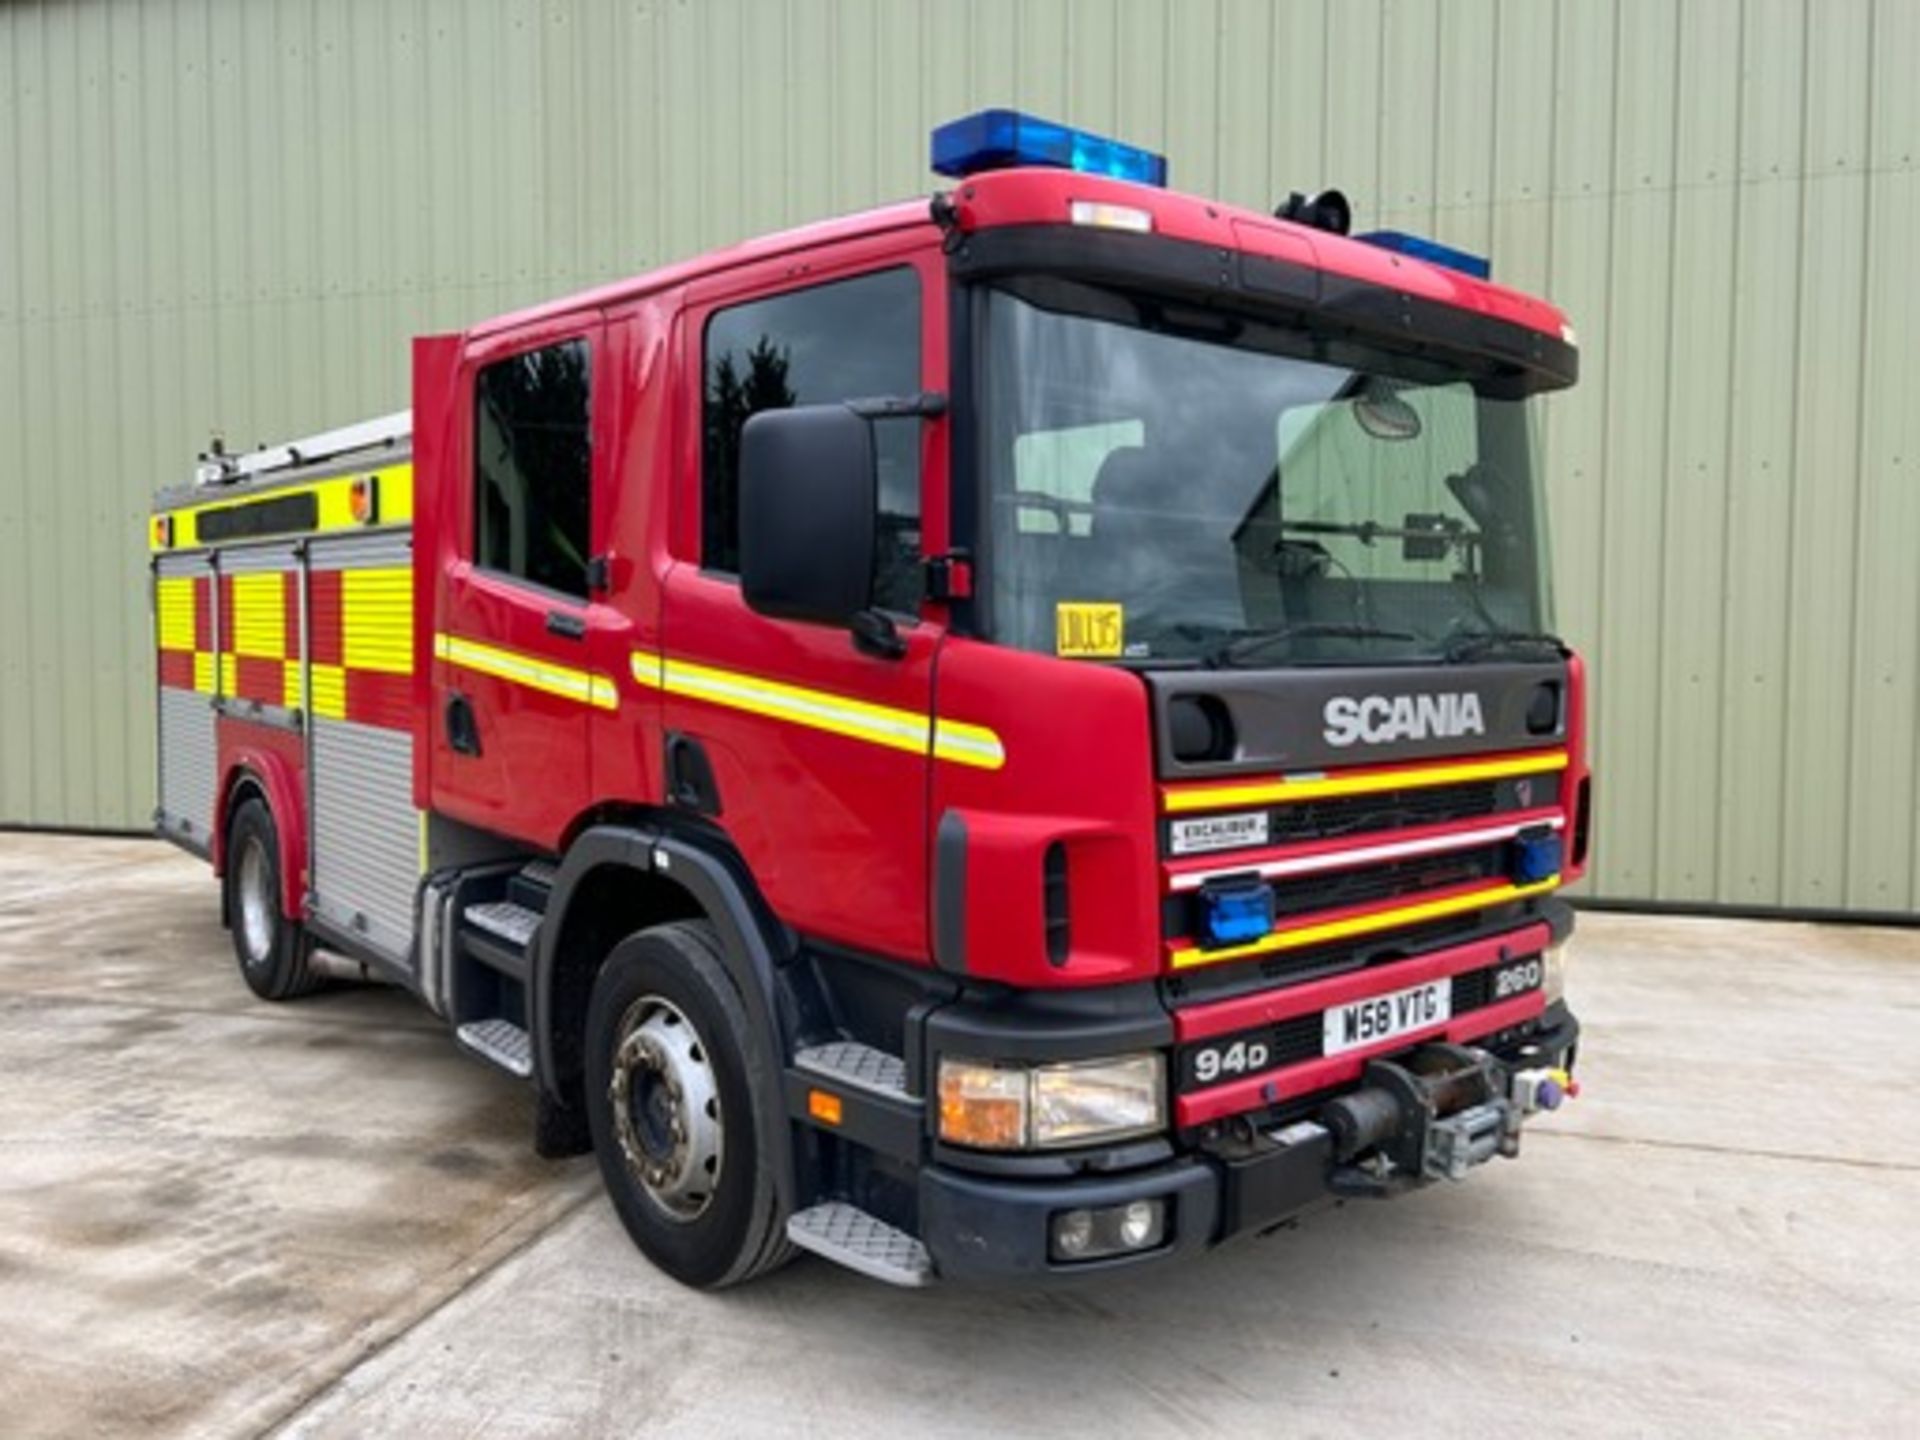 Scania Excalibur 94D 260 Fire Appliance - Image 2 of 26